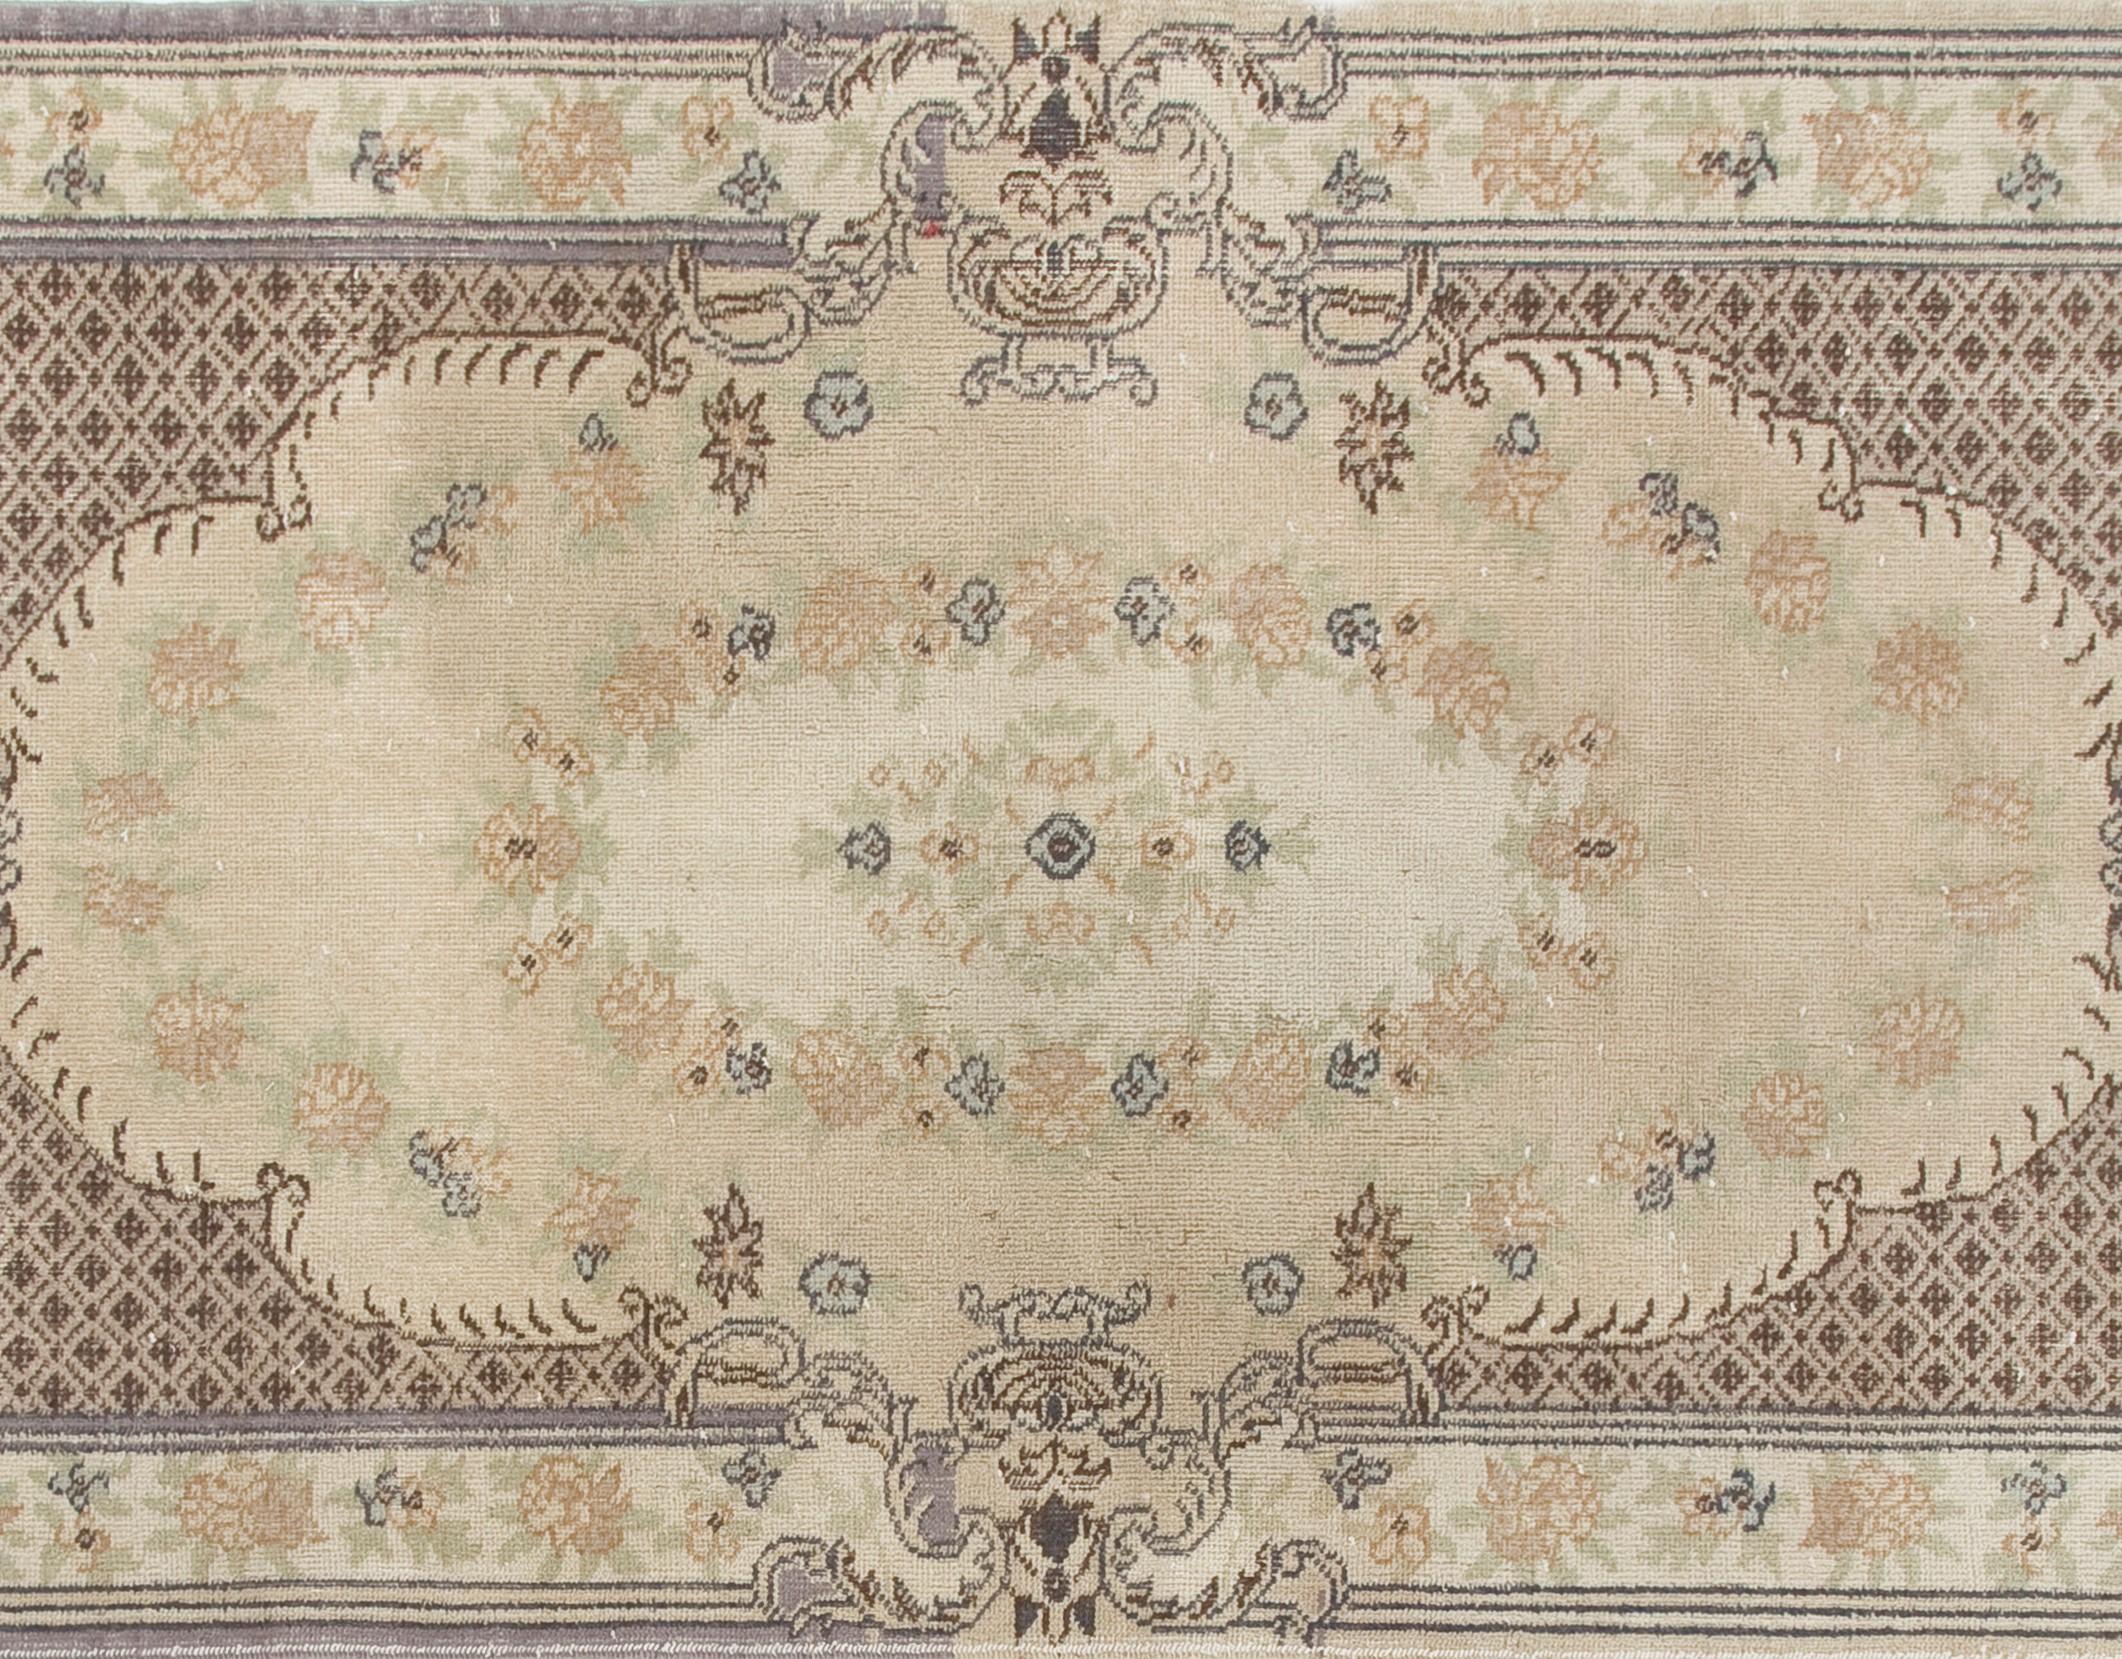 3.8x7 Ft Vintage Hand-Knotted Aubusson-Inspired Turkish Wool Rug in Beige In Good Condition For Sale In Philadelphia, PA